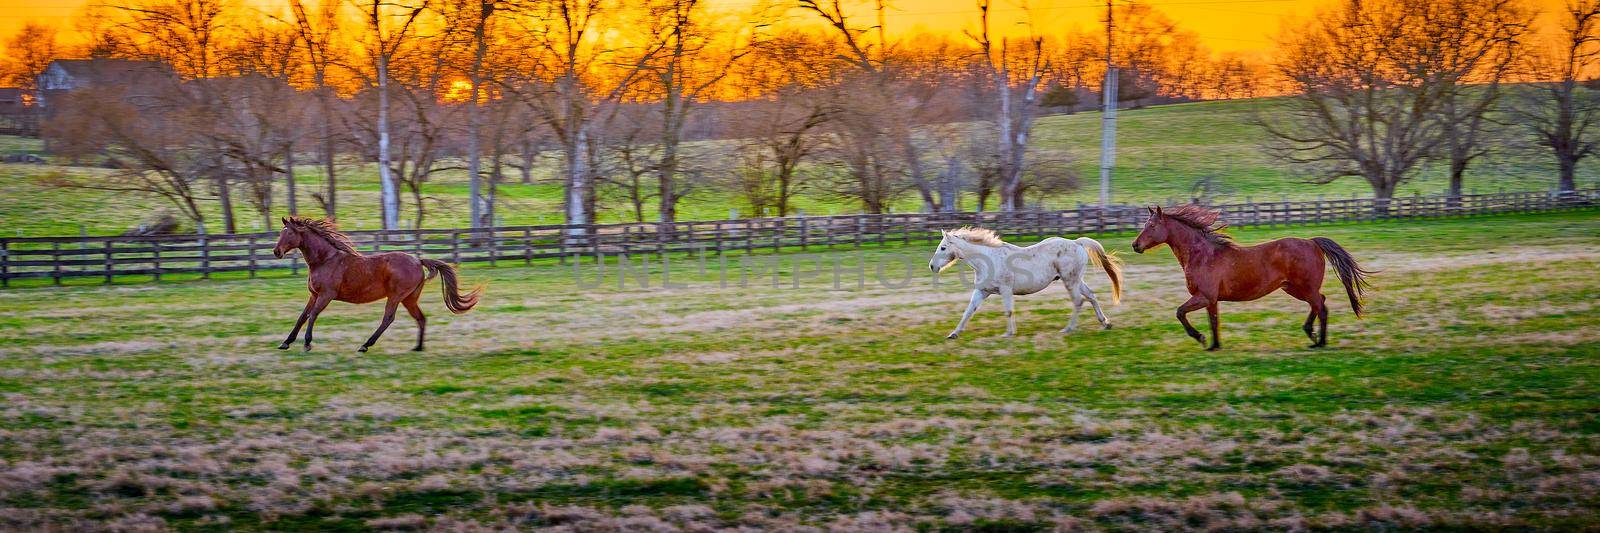 Three horses running in a field at sunset. by patrickstock